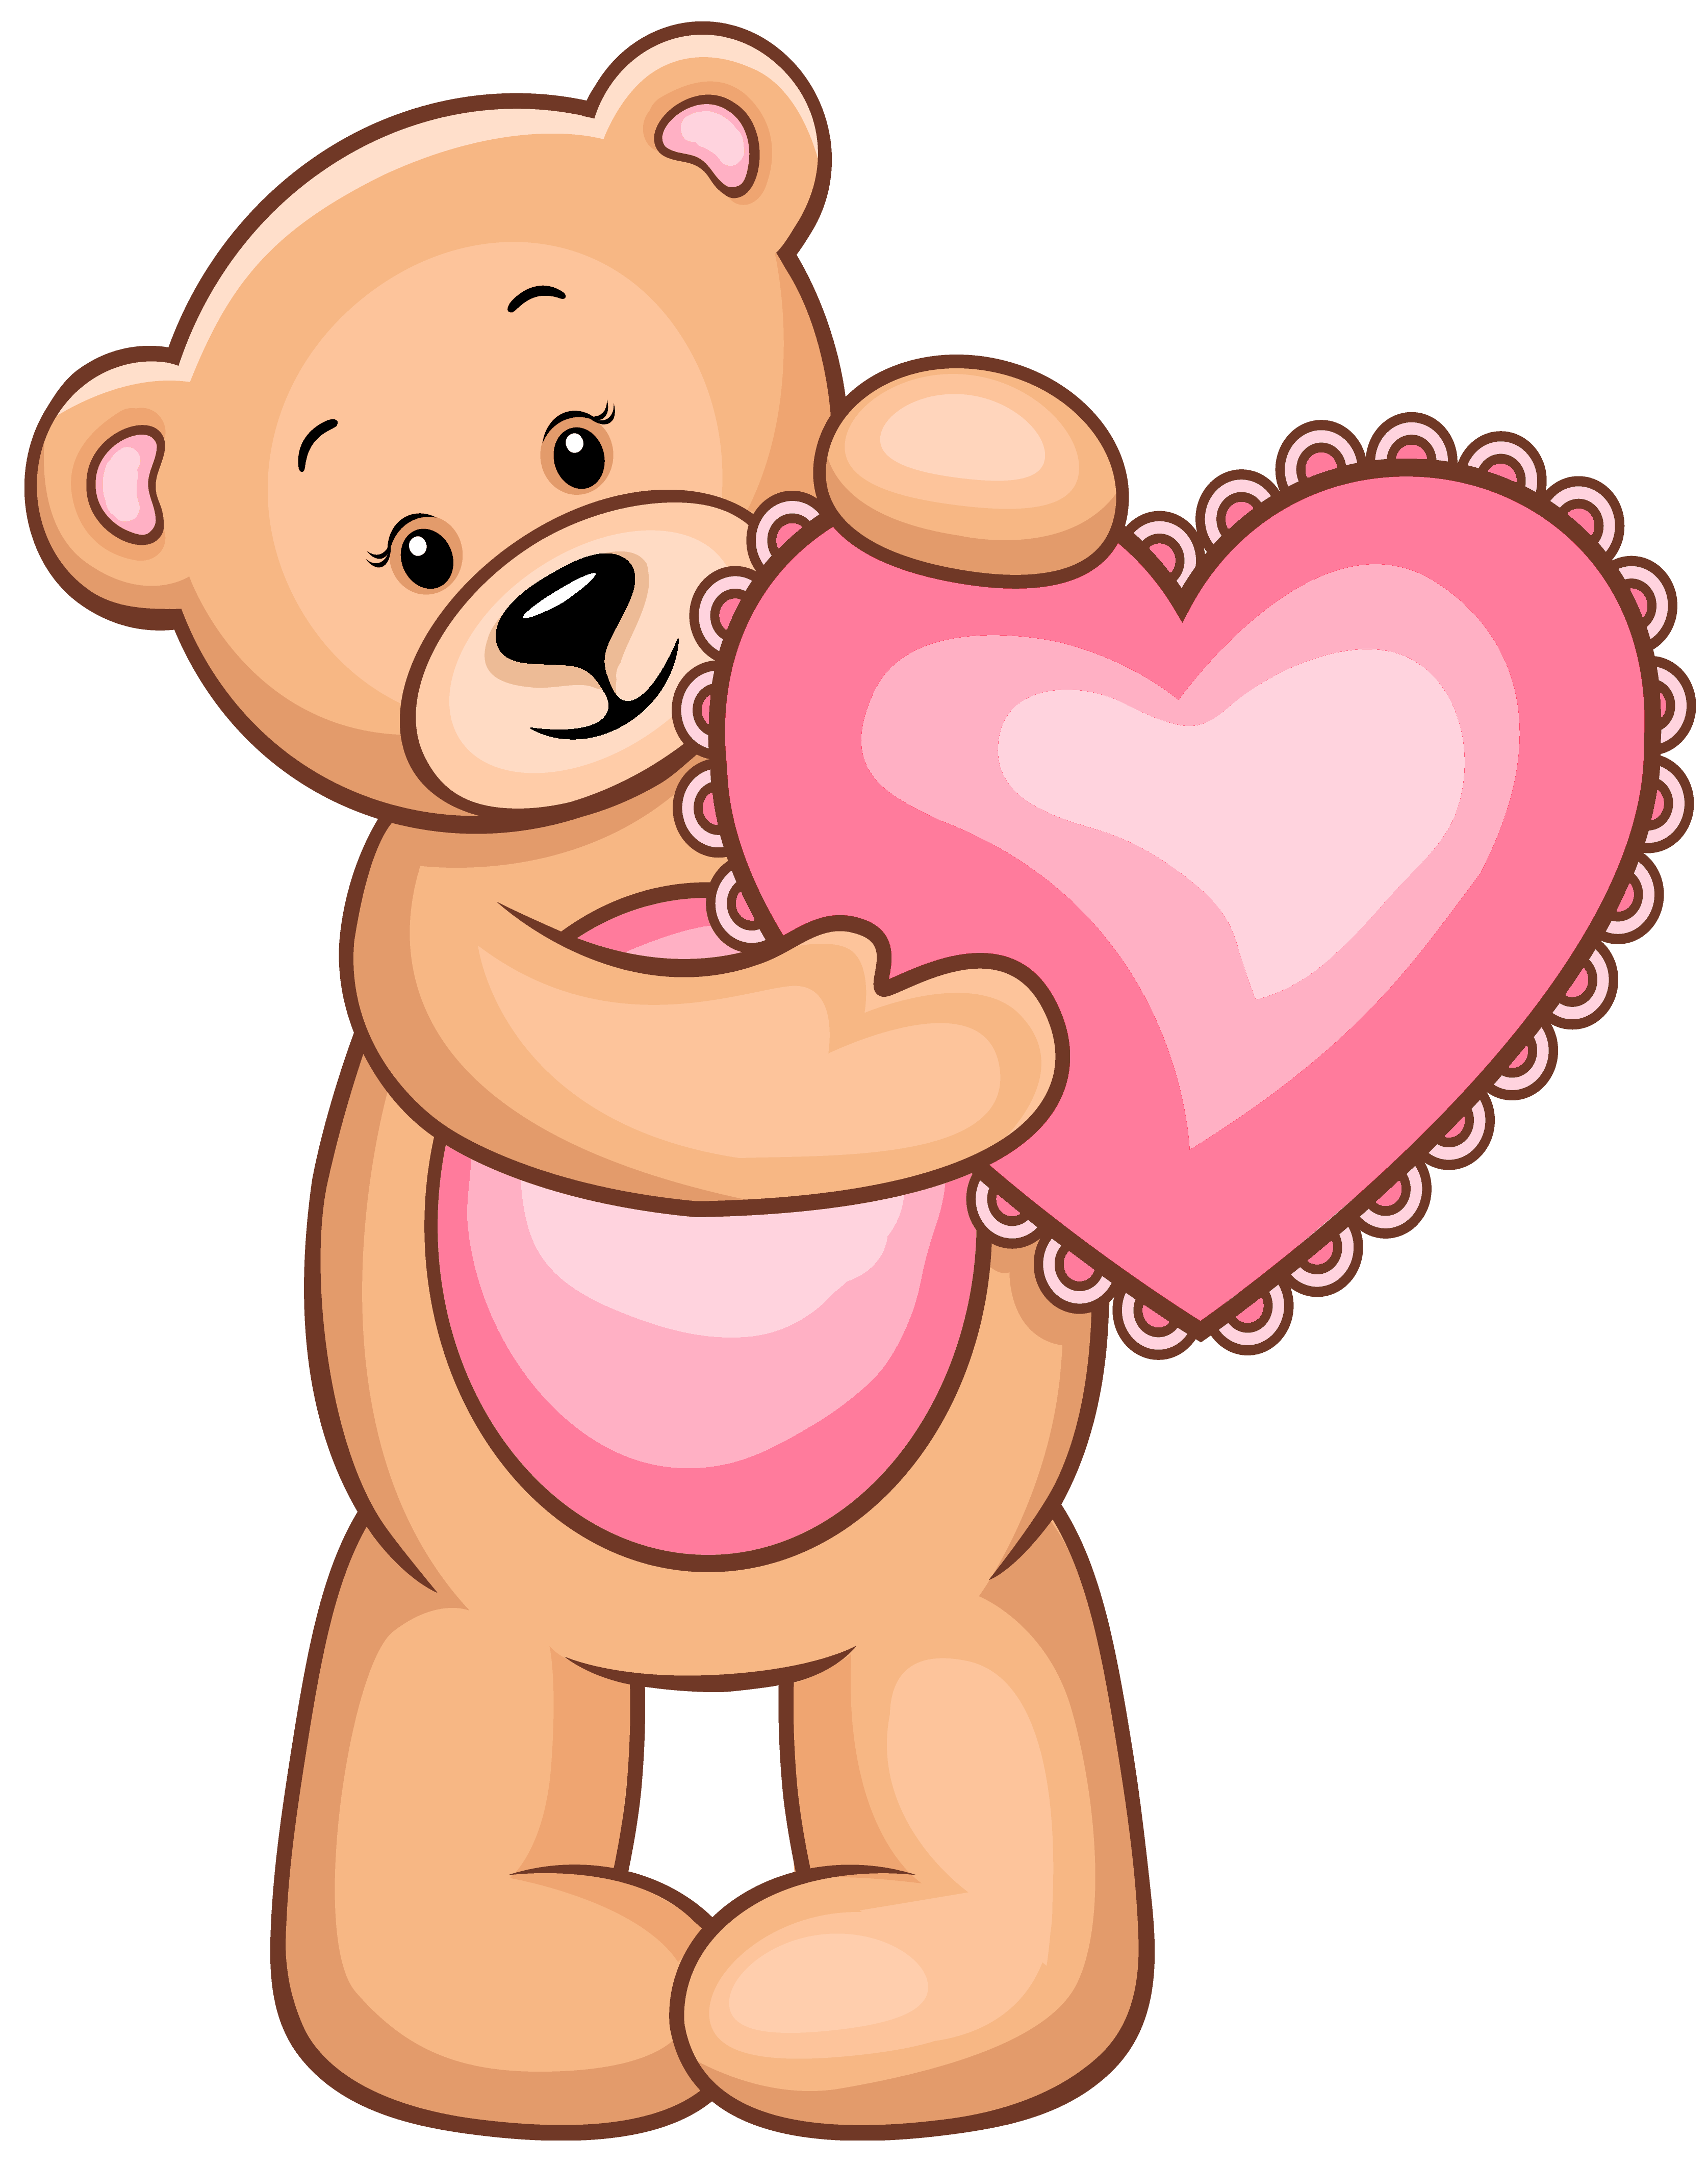 Transparent Teddy Bear with Pink Heart PNG Clipart